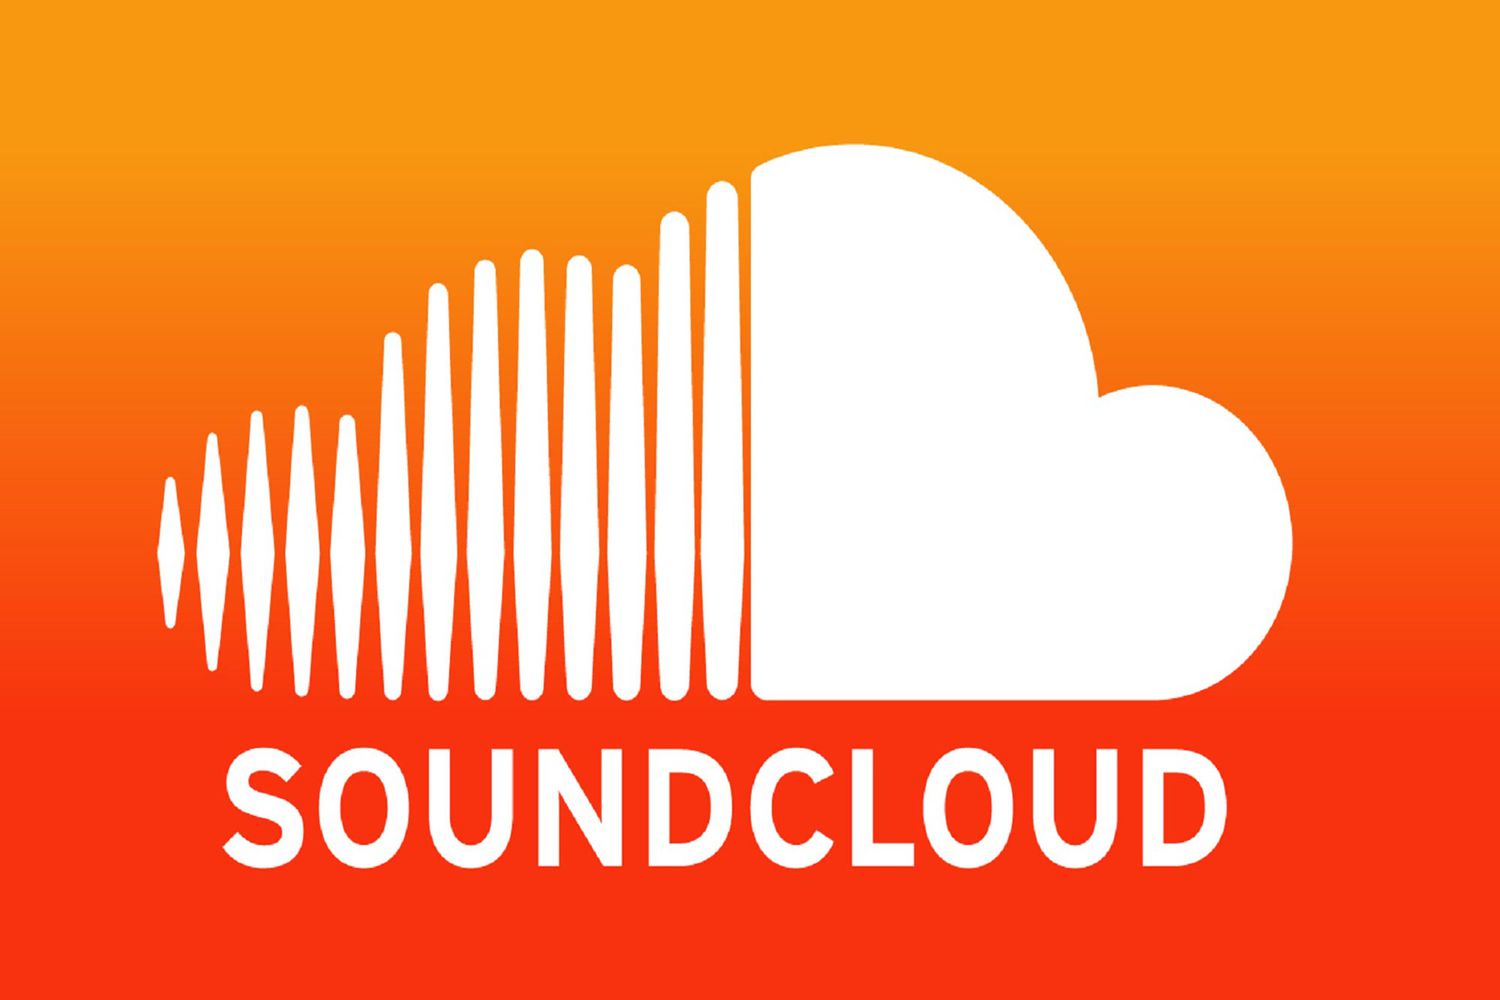 Advertise on SoundCloud